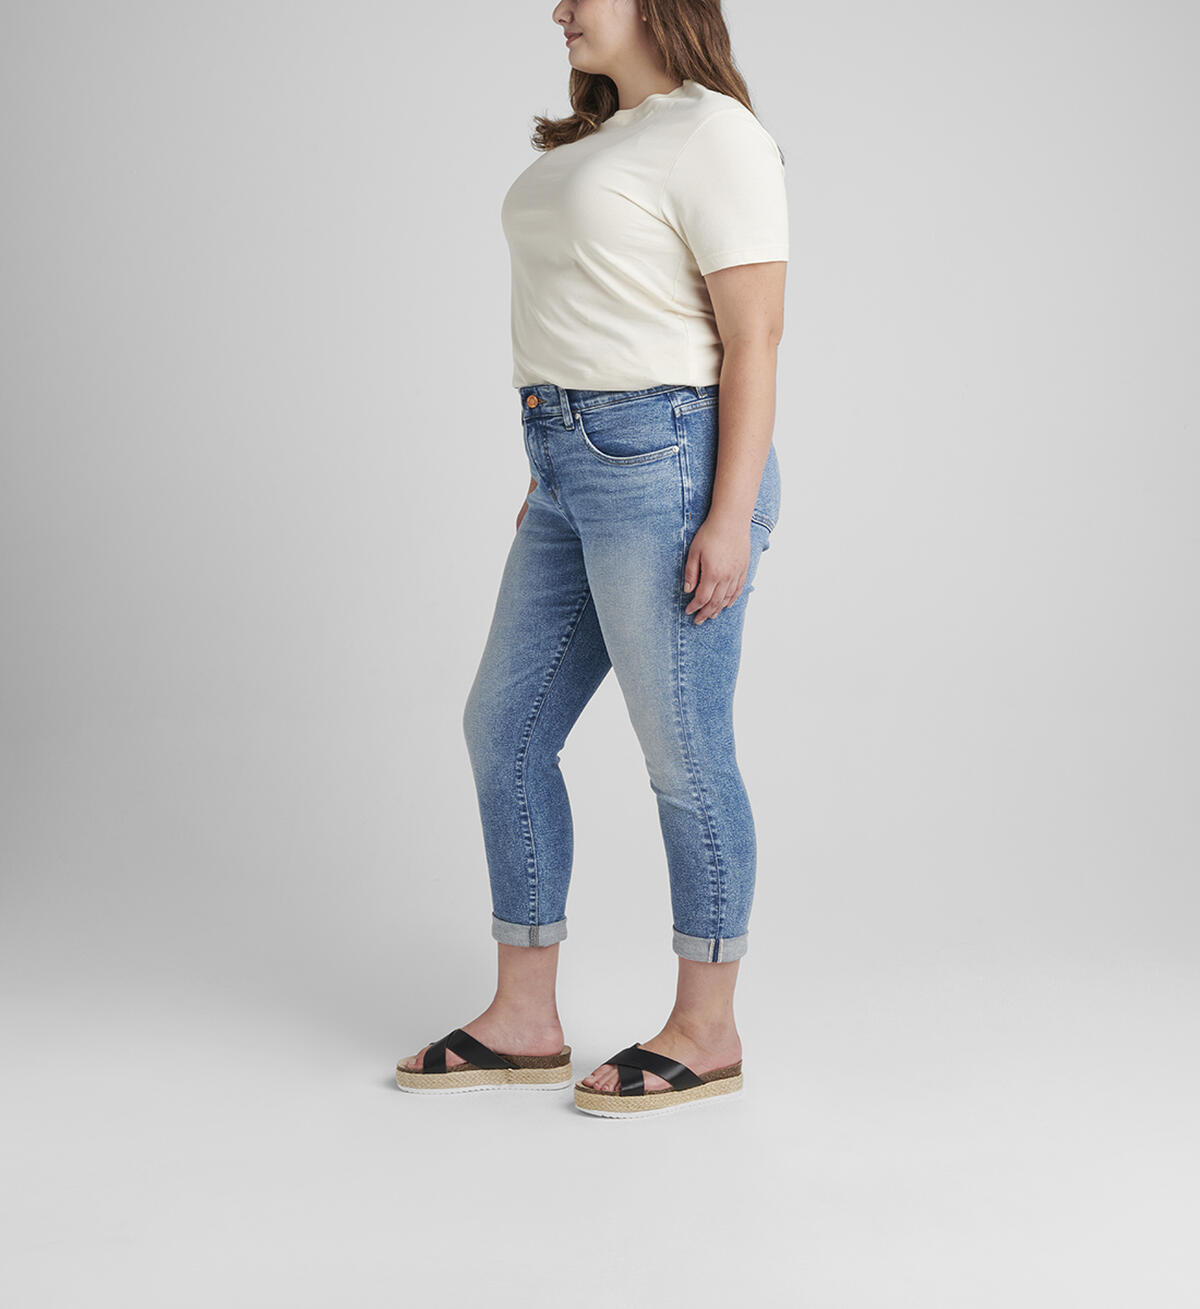 Carter Mid Rise Girlfriend Jeans Plus Size, , hi-res image number 2